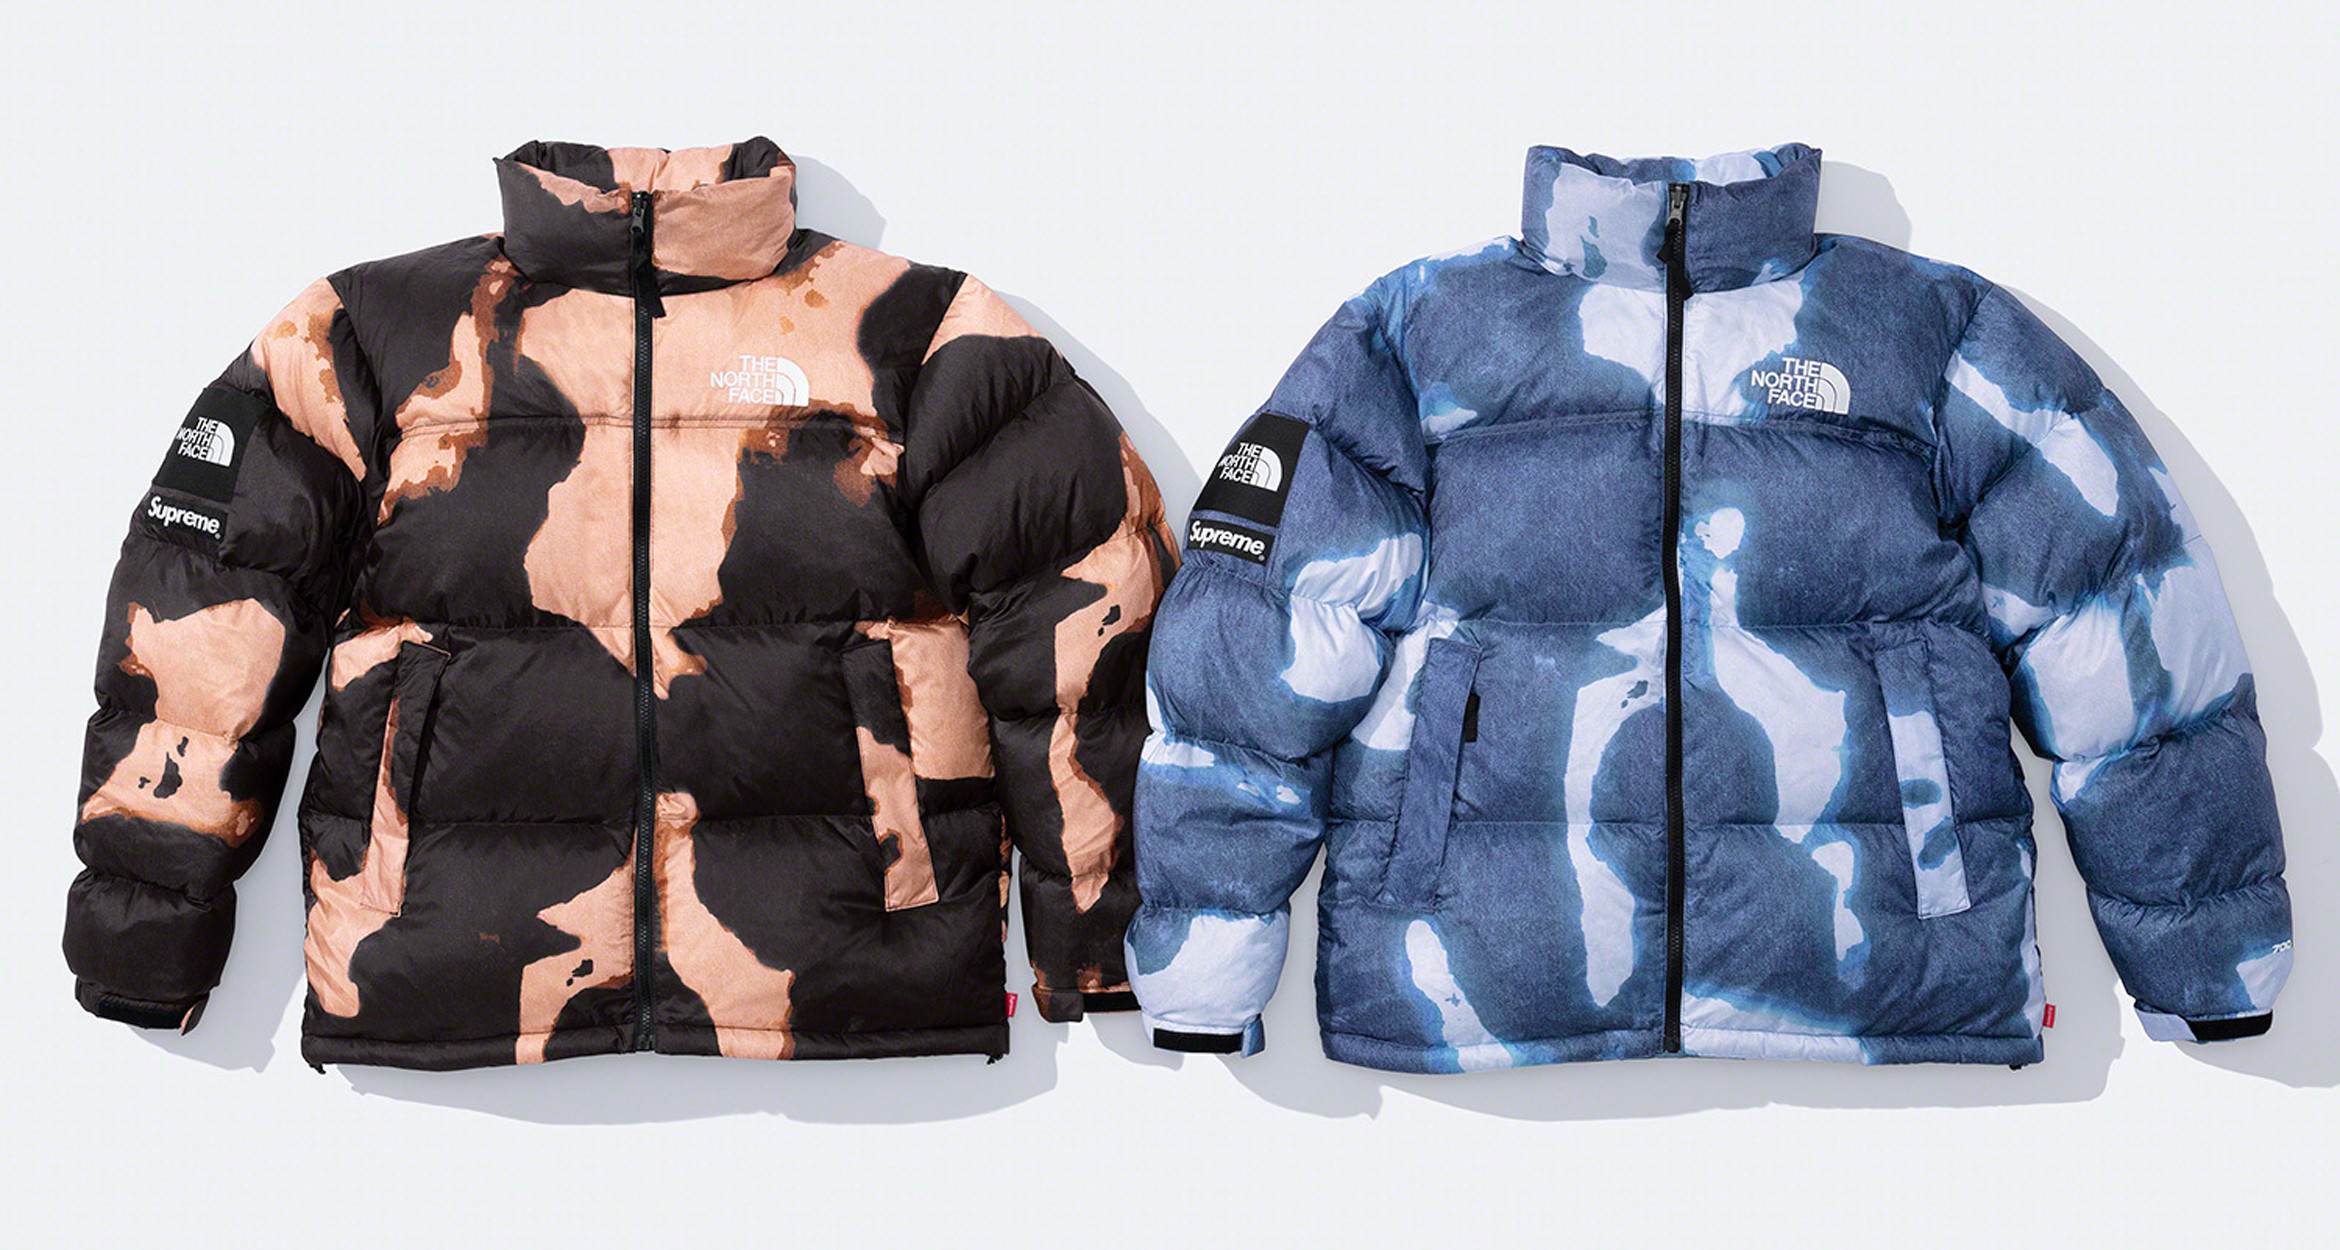 Supreme Bleach Nuptse & Mountain Jackets for The North Face